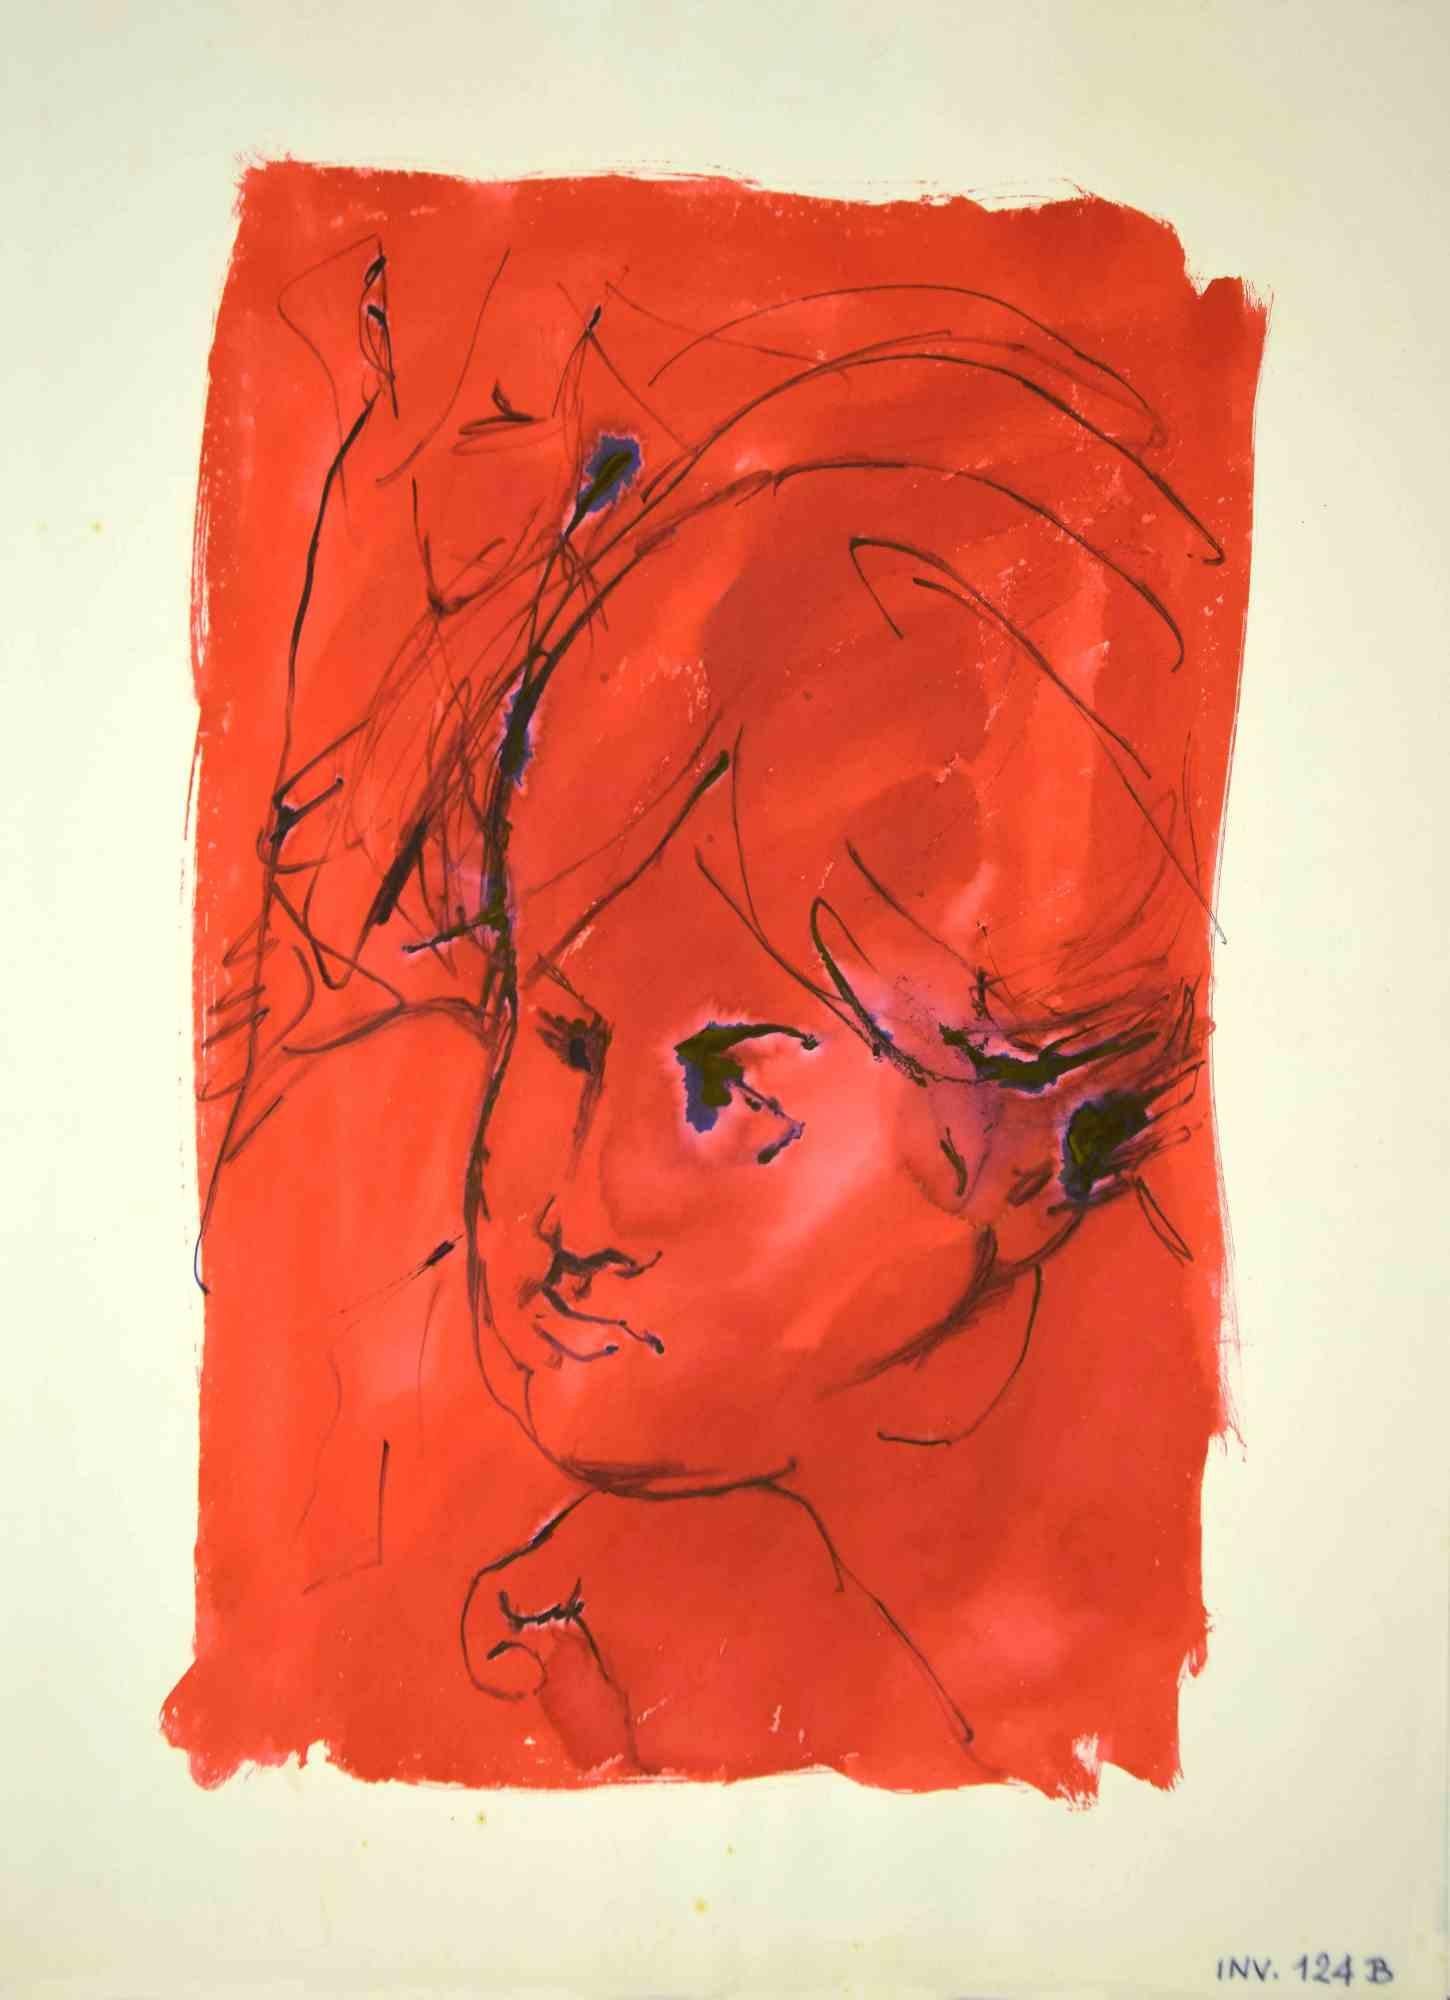 Portrait is an original drawing in ink and watercolor realized by Leo Guida in the 1970s.

Good condition.

Leo Guida  (1992 - 2017). Sensitive to current issues, artistic movements and historical techniques, Leo Guida has been able to weave with